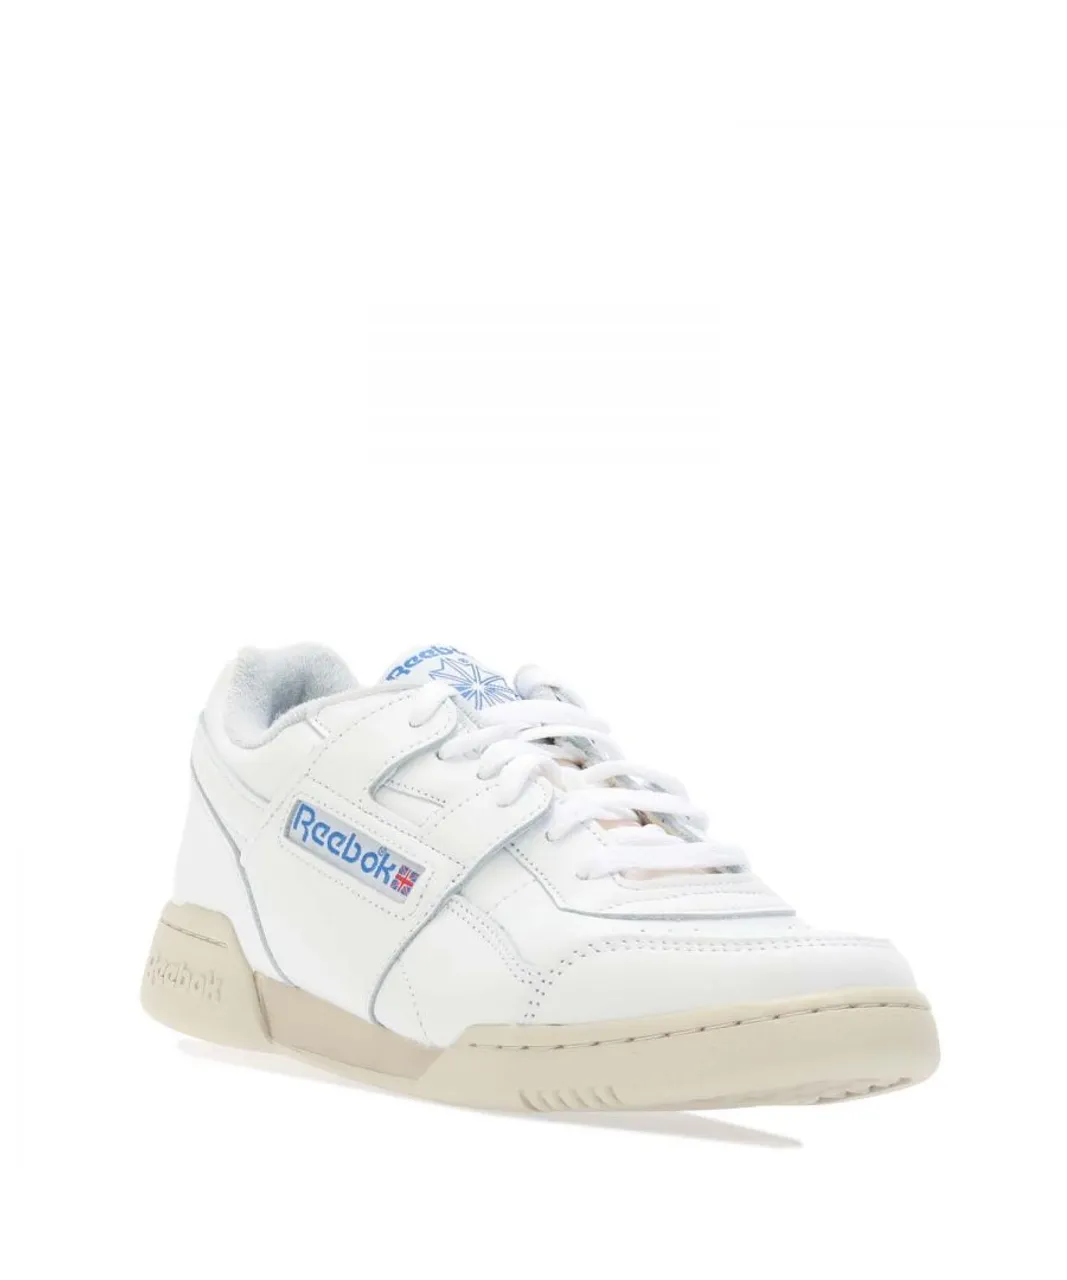 Reebok Mens Classics Unisex Workout Plus Vintage Trainers in White Leather (archived)